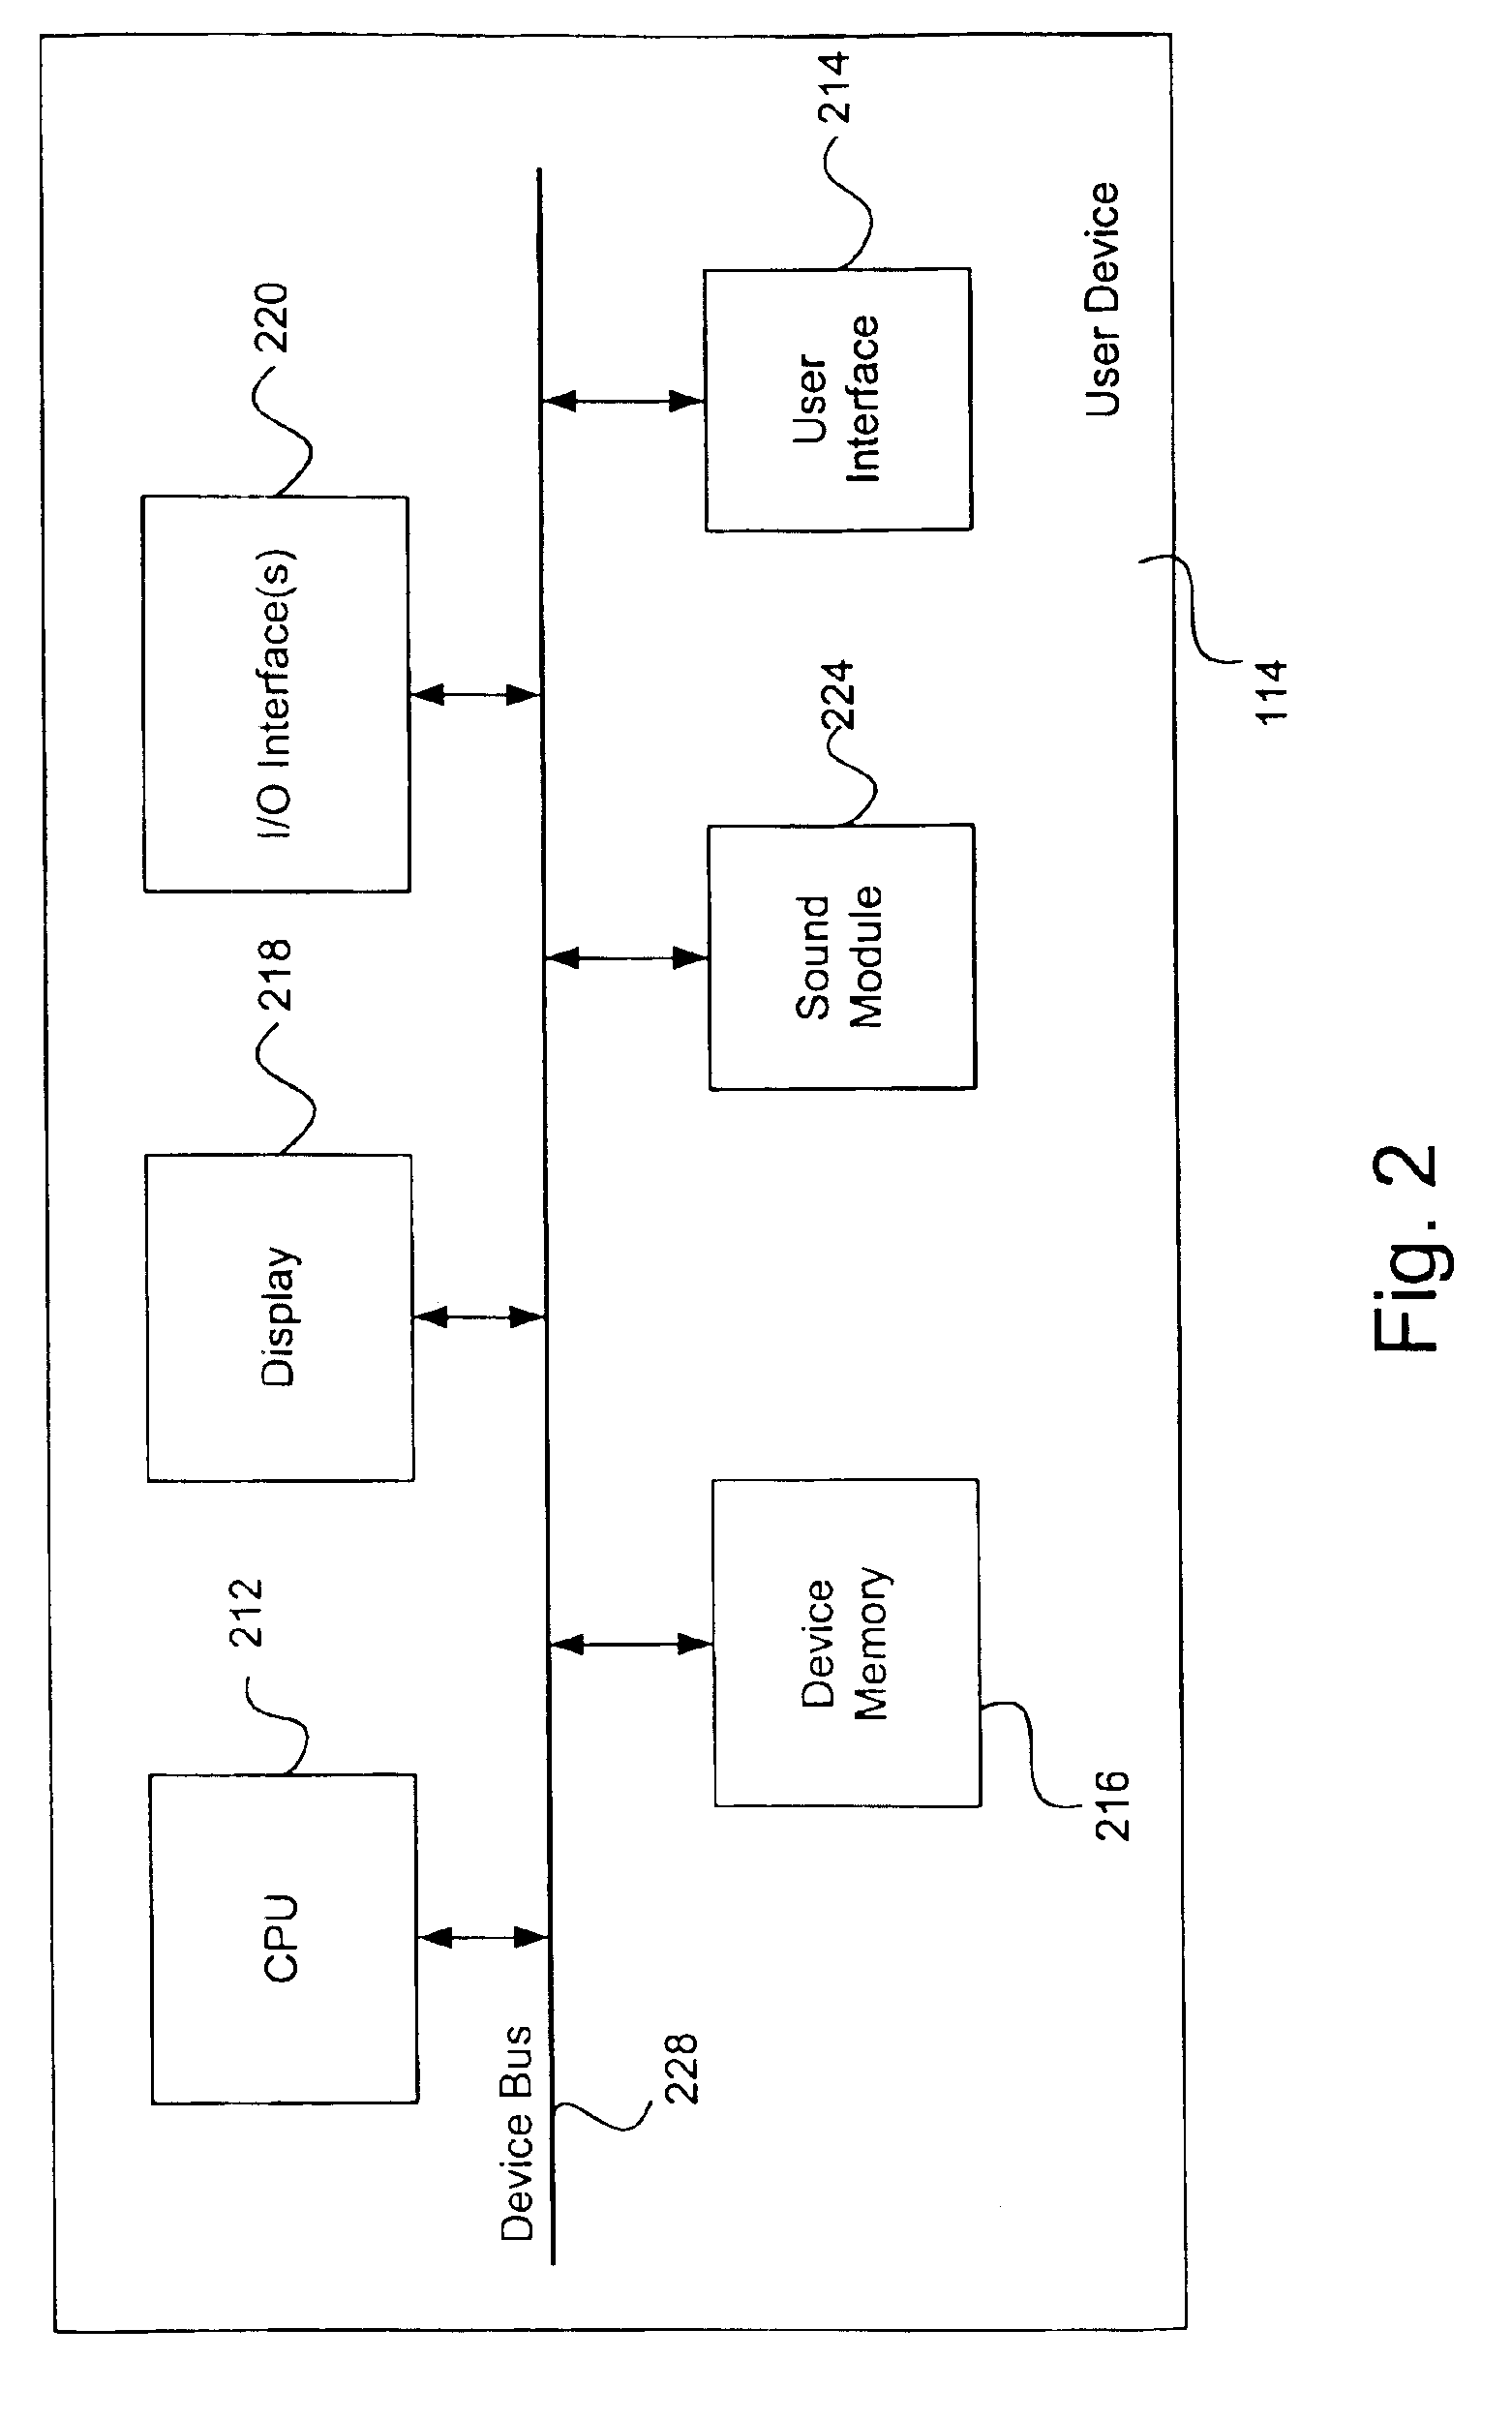 System and method to support gaming in an electronic network